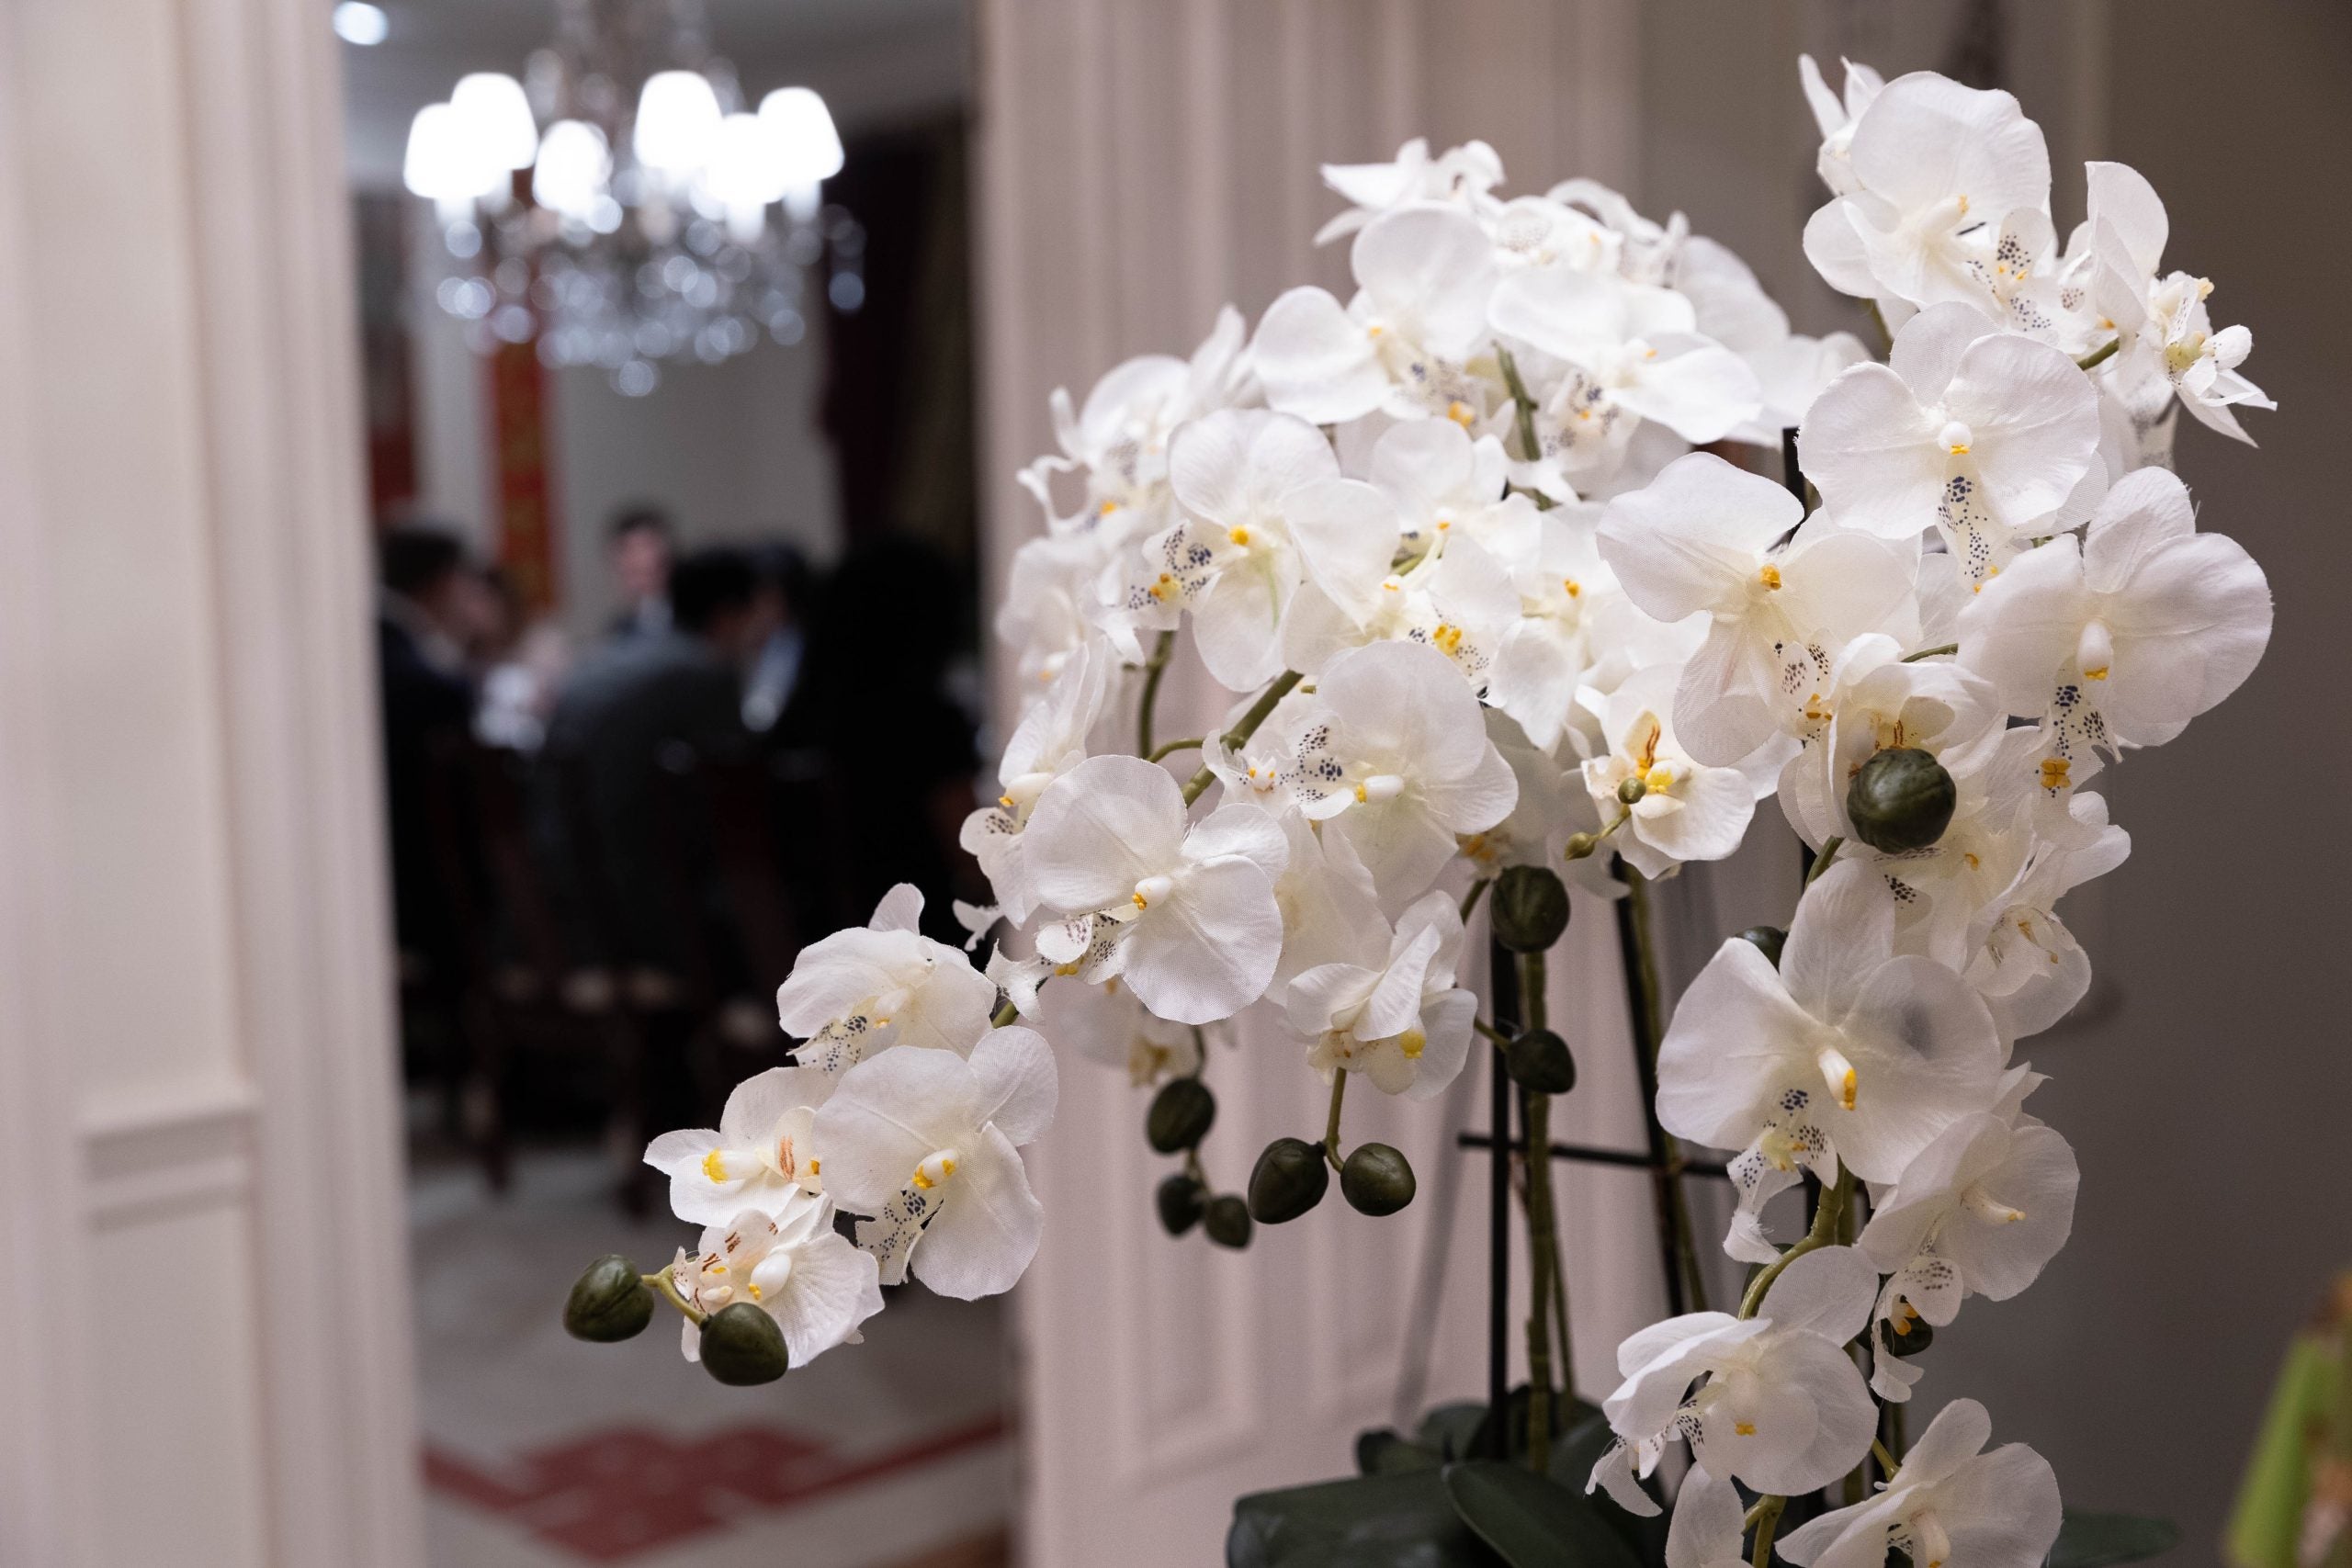 A decoration of white flowers by a door where everyone is eating dinner